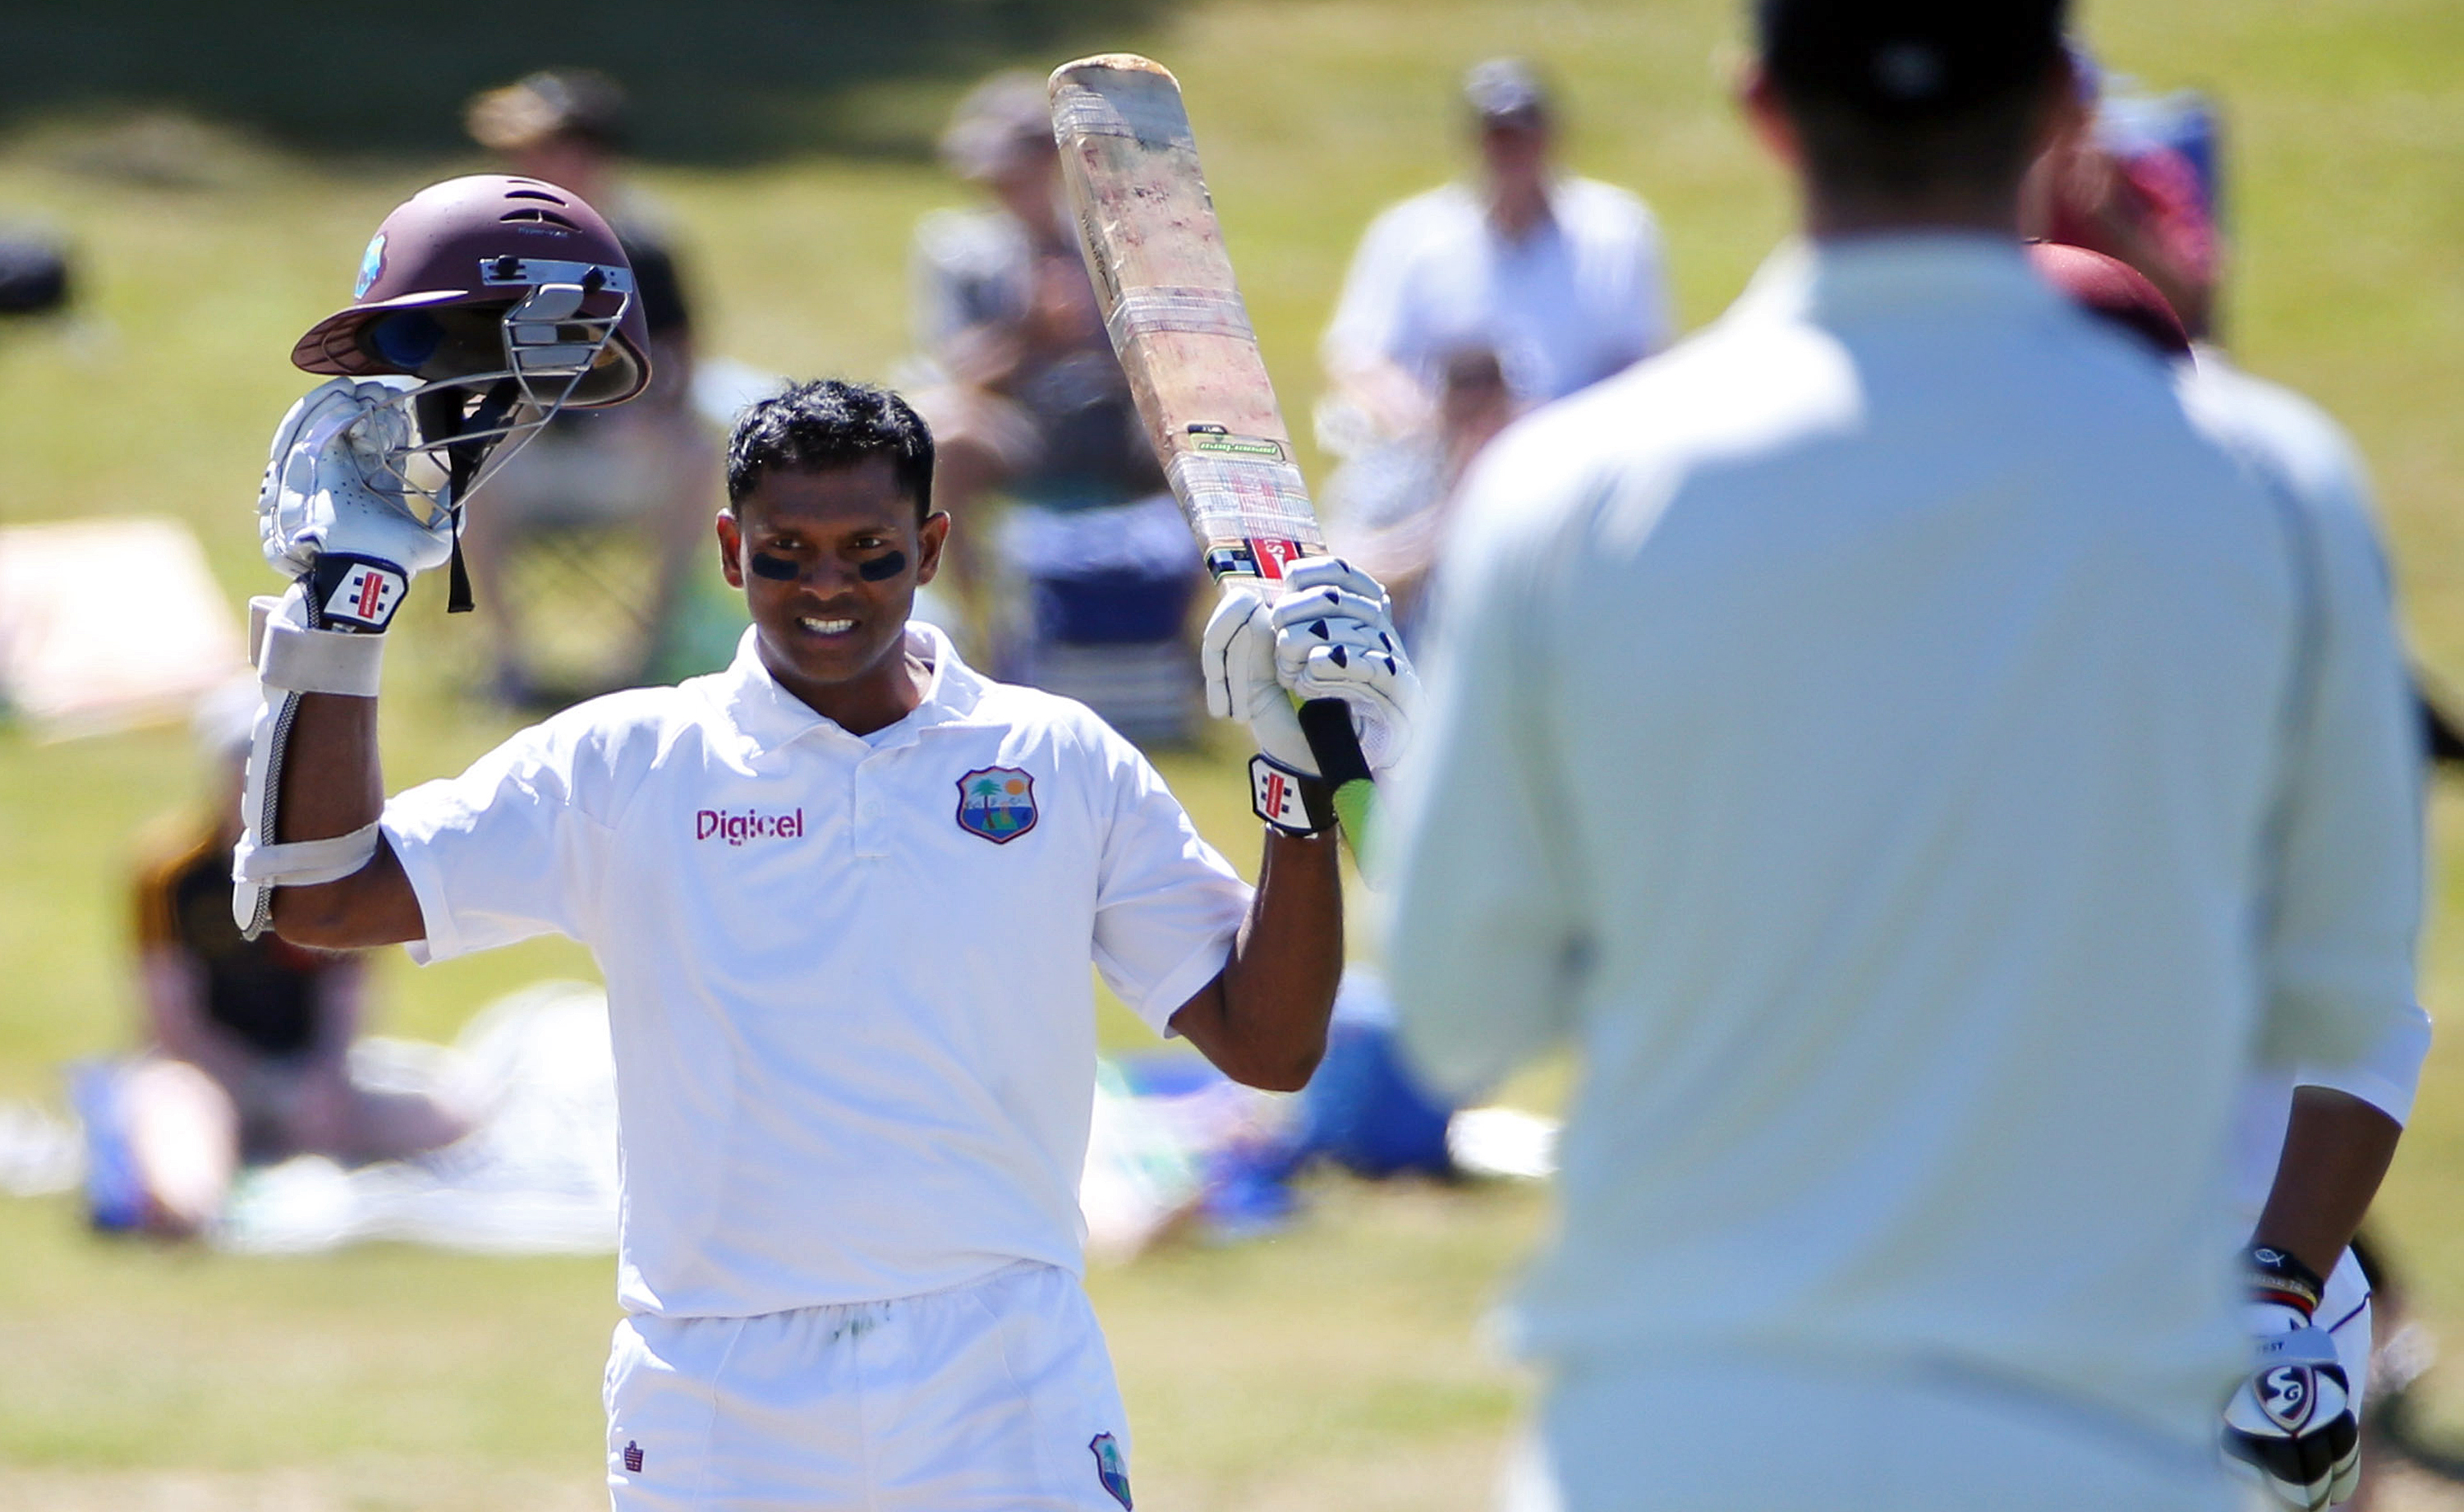 Shivnarine Chanderpaul Appointed as Head Coach of the National Women’s Team and Women’s Under 19 Teams